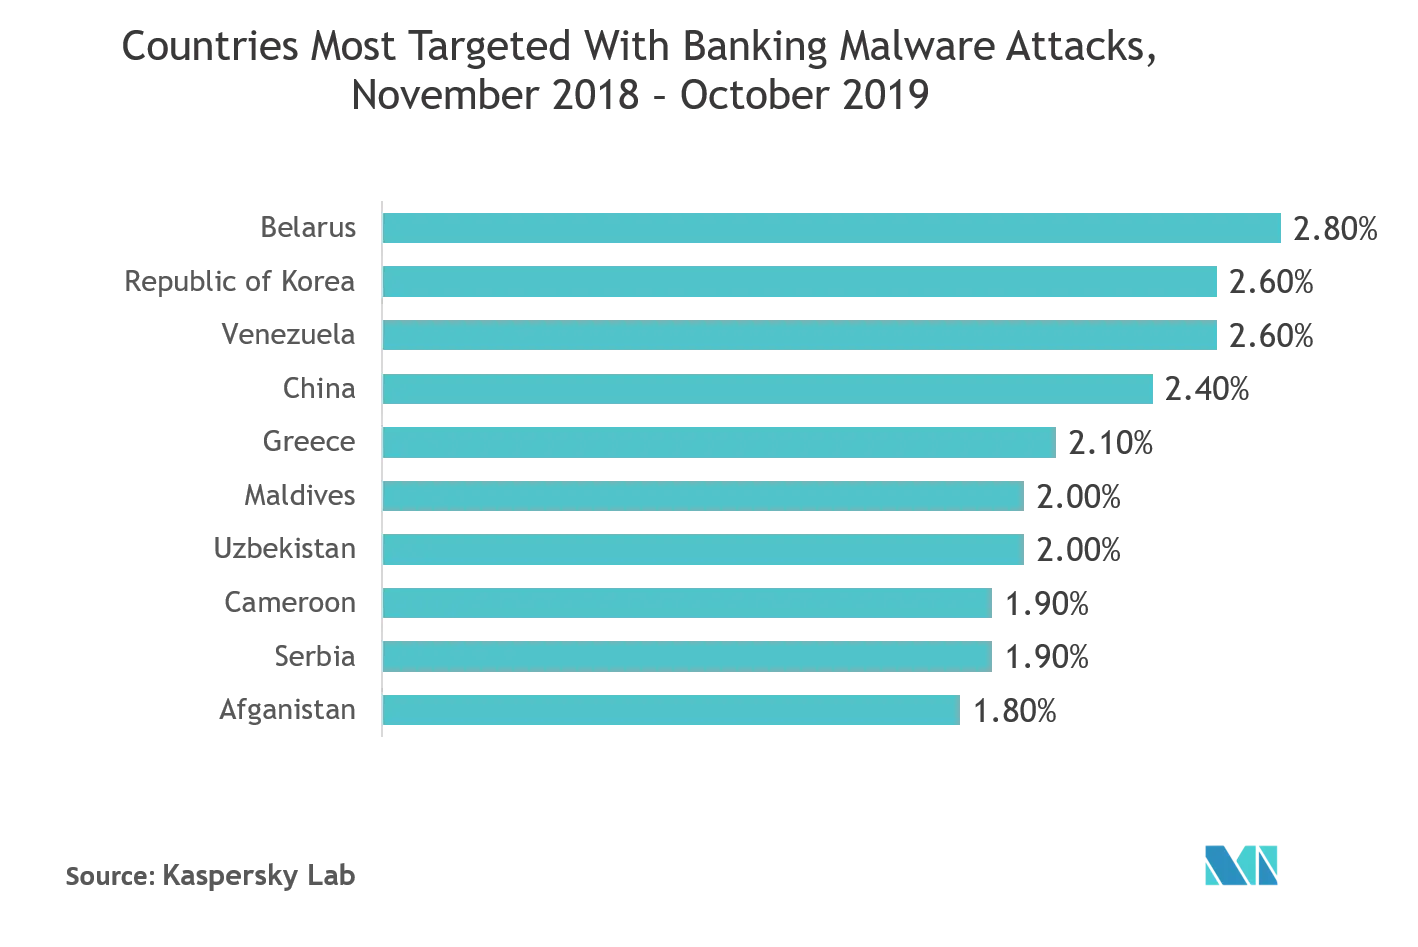 Risk Analytics Market: Countries Most Targeted with Banking Malware Attacks, November 2018 - October 2019